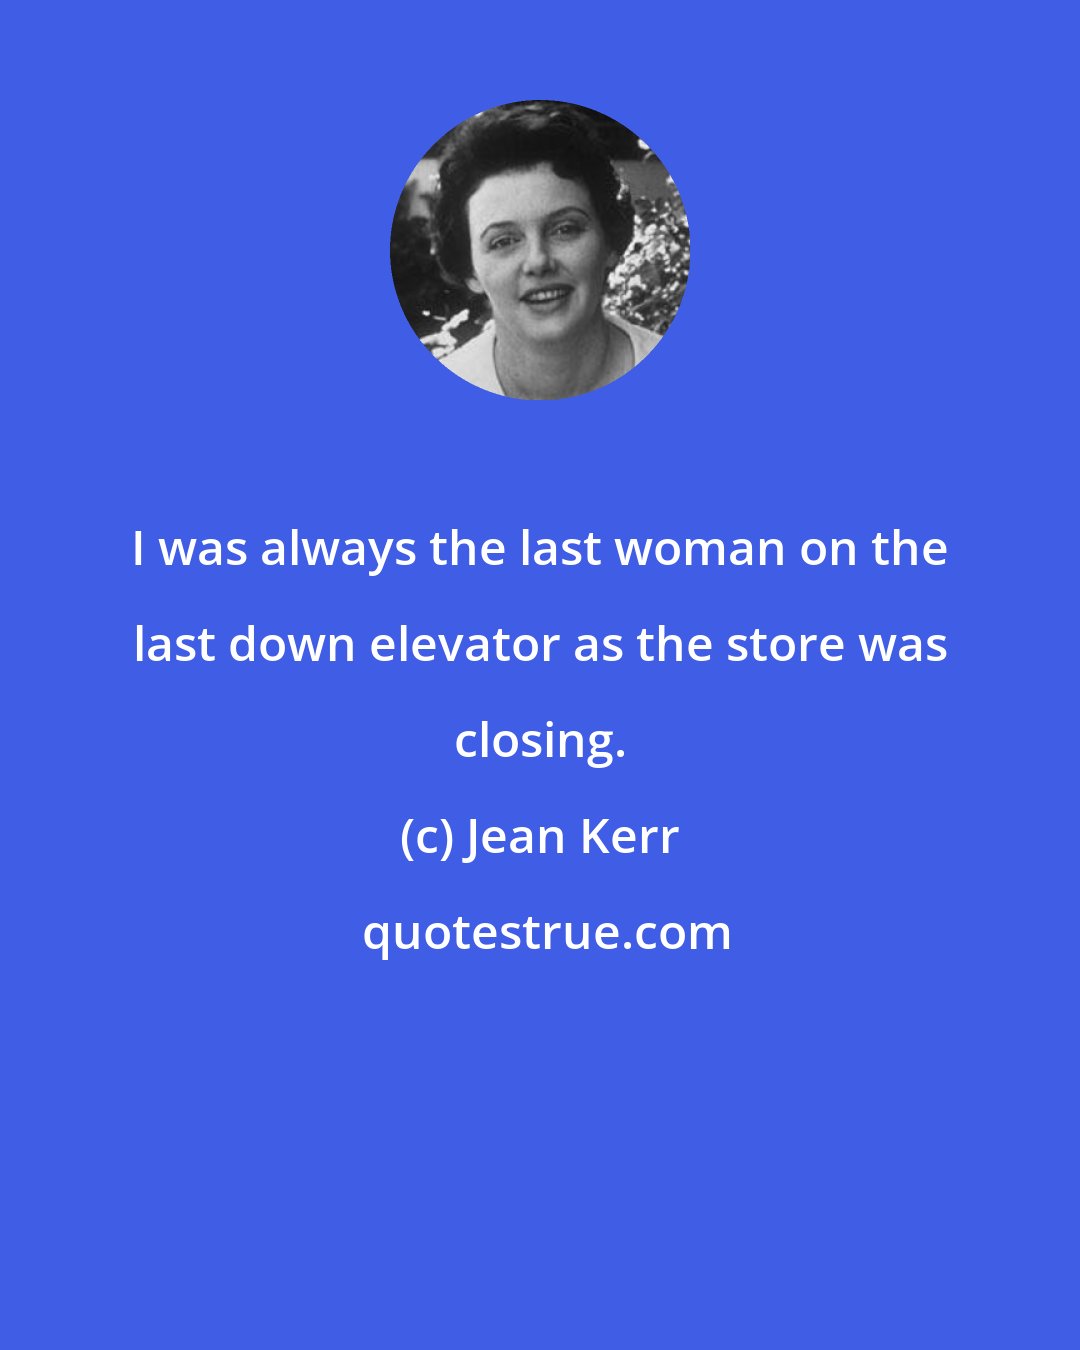 Jean Kerr: I was always the last woman on the last down elevator as the store was closing.